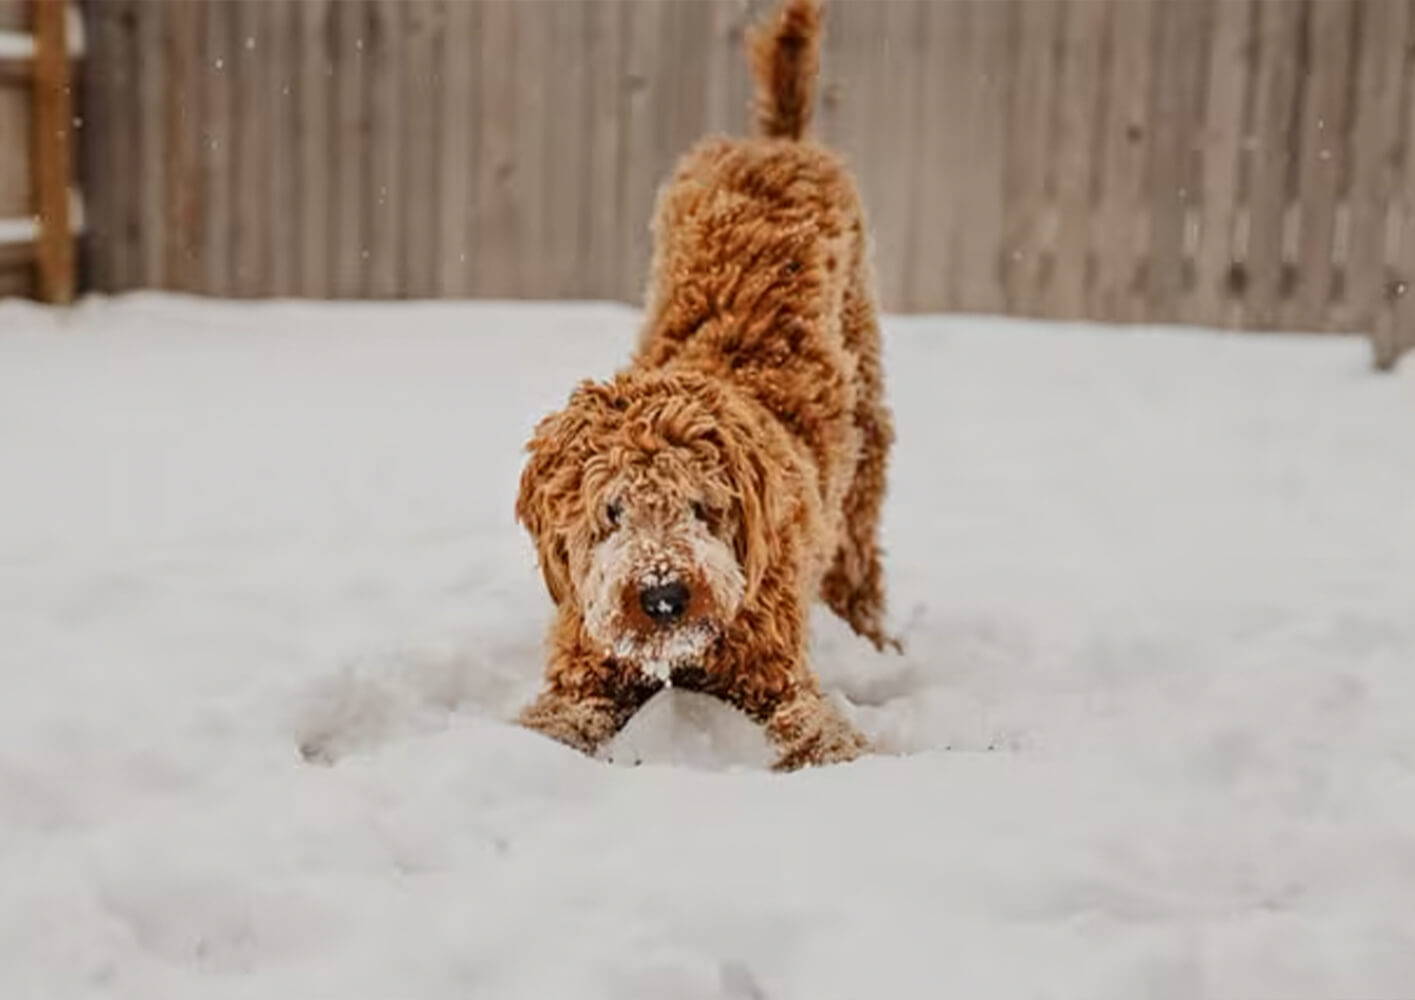 Healthy snacks to pack for your winter dog walk